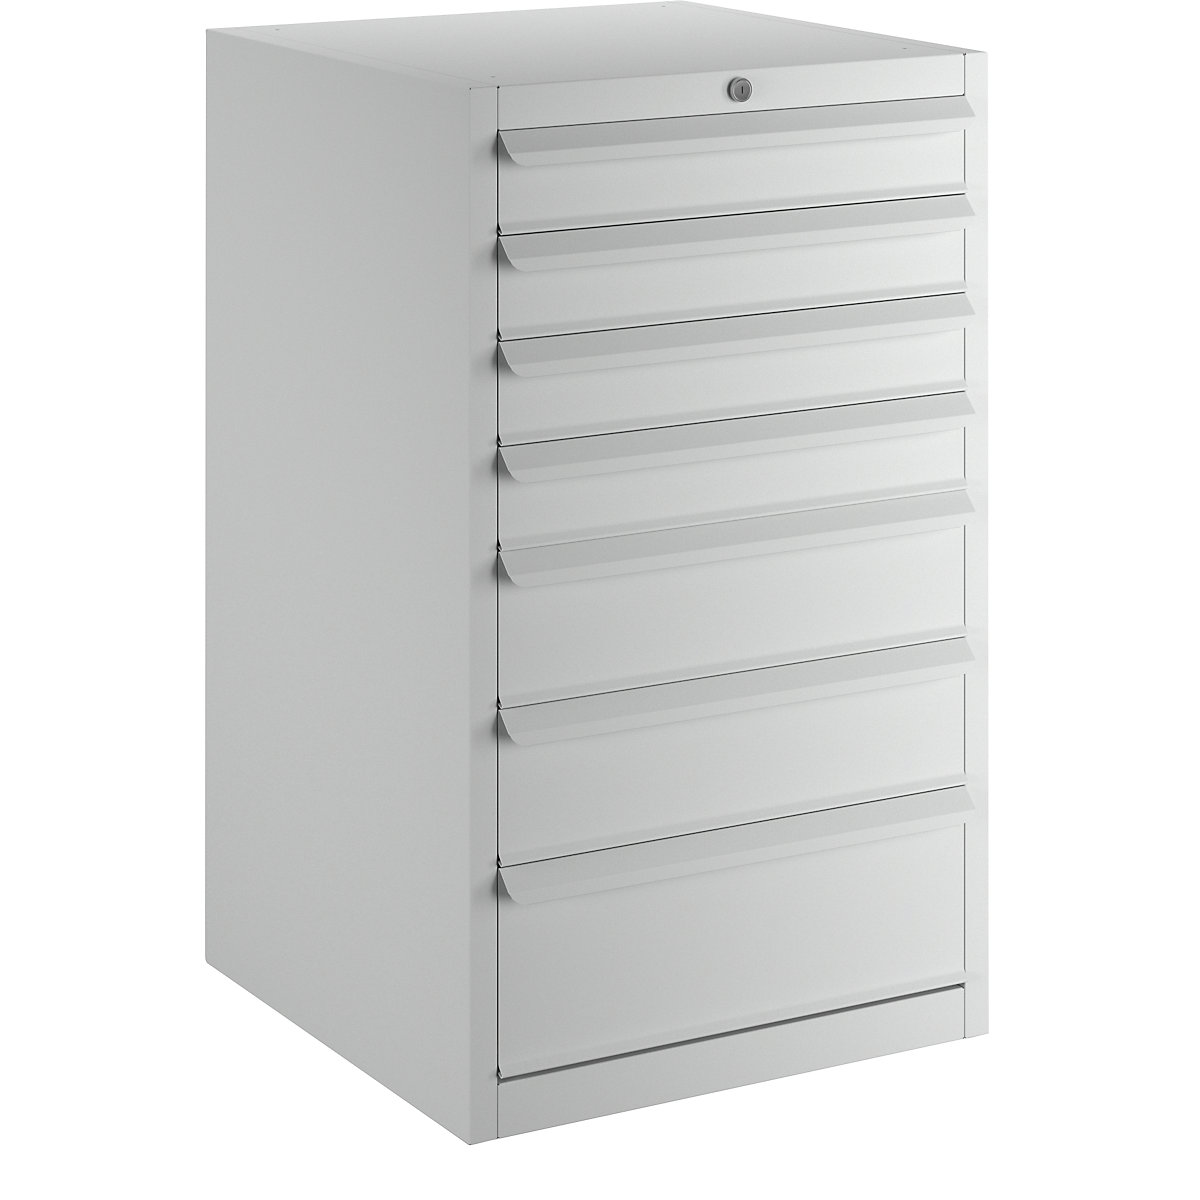 Drawer cupboard, WxD 600 x 600 mm, height 1000 mm, 7 drawers, light grey-3